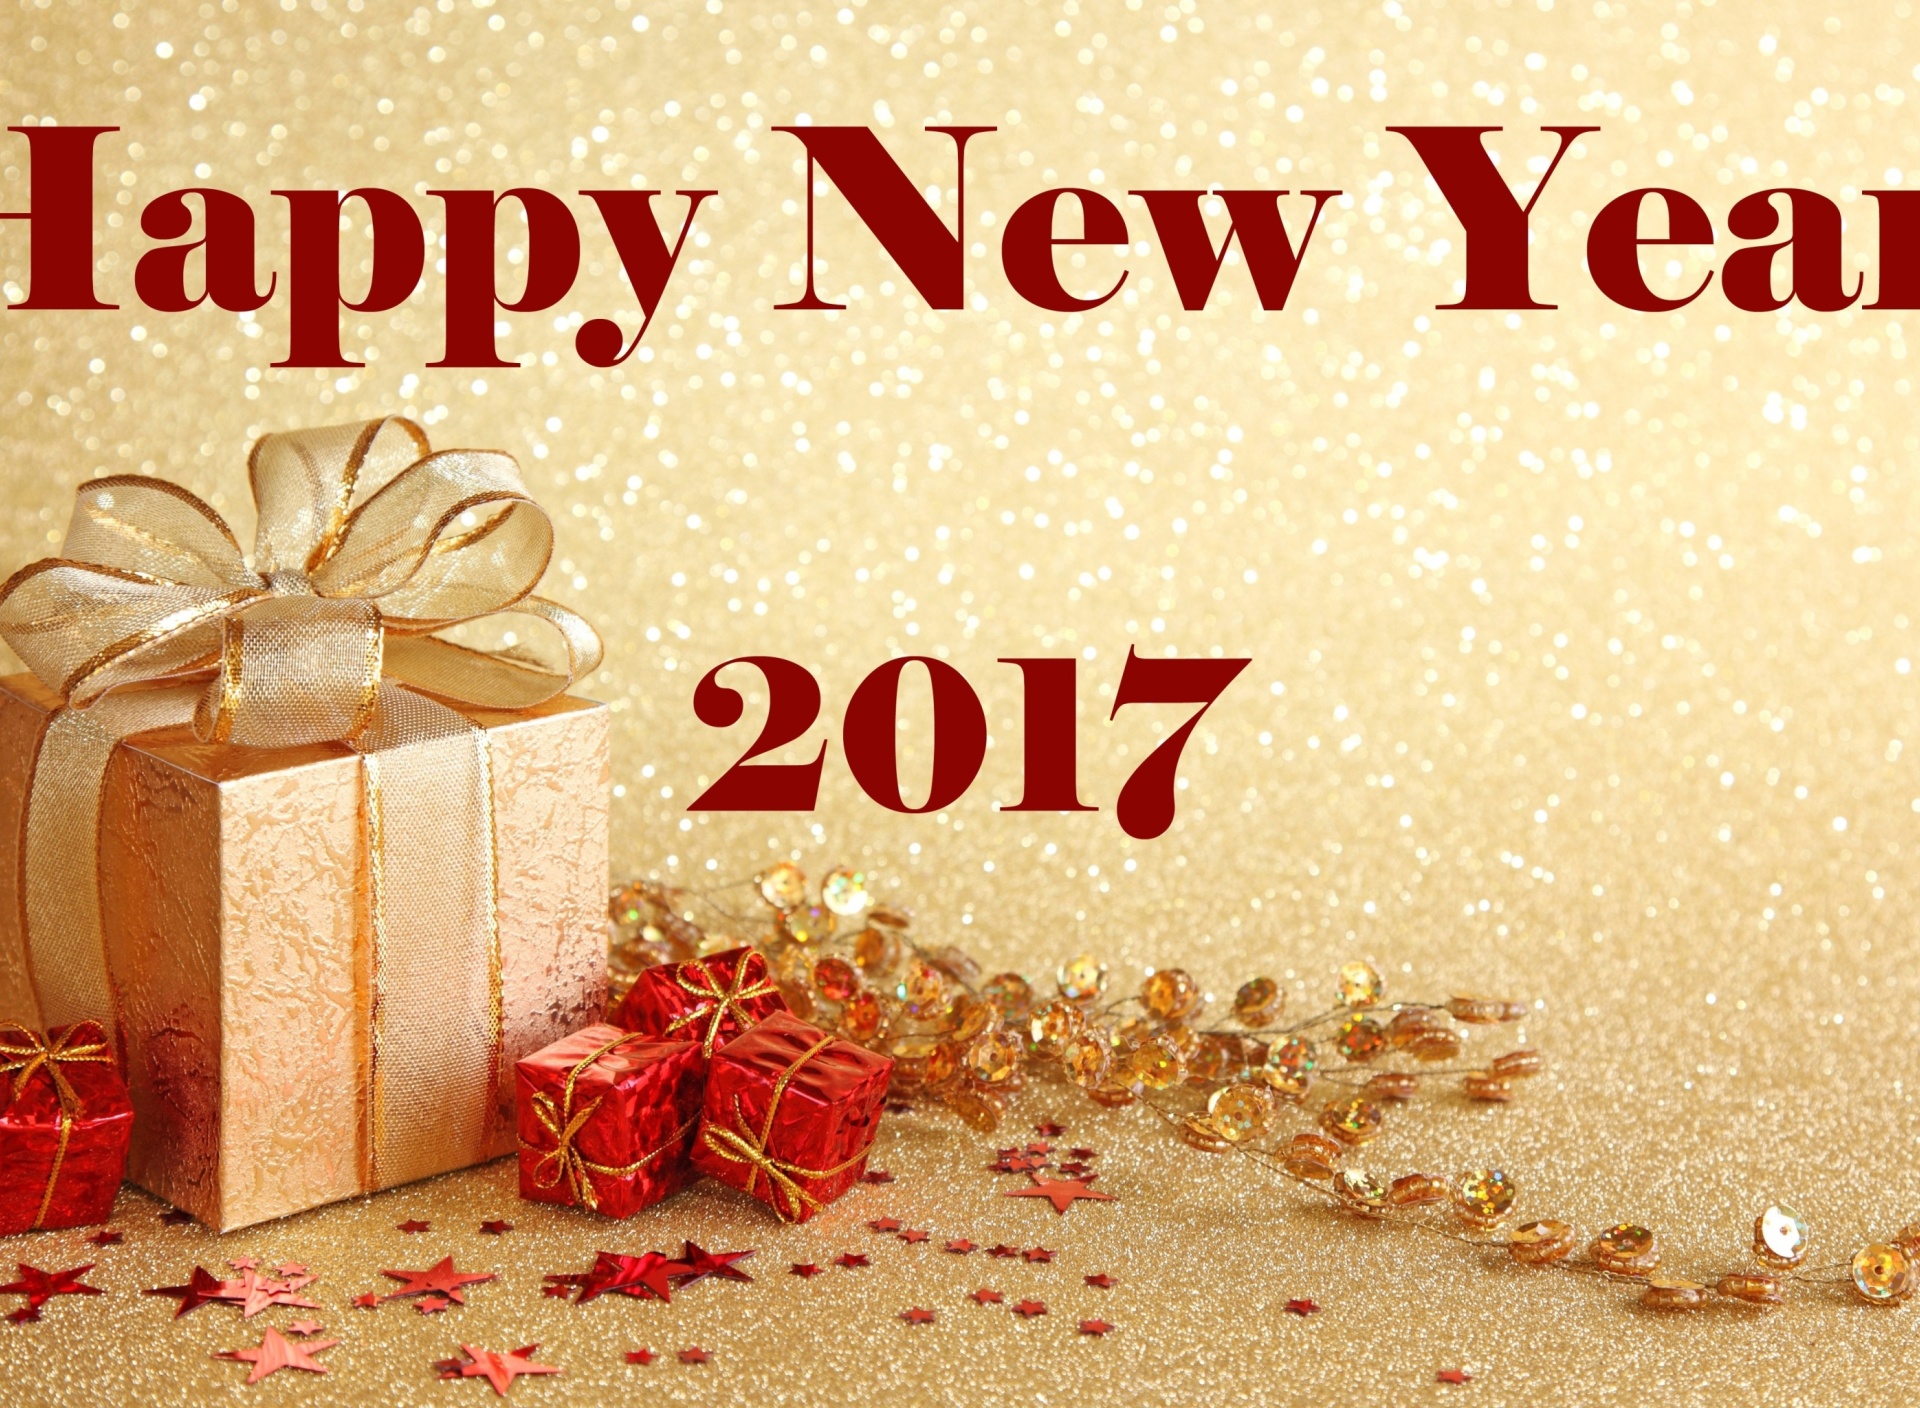 Happy New Year 2017 with Gifts screenshot #1 1920x1408